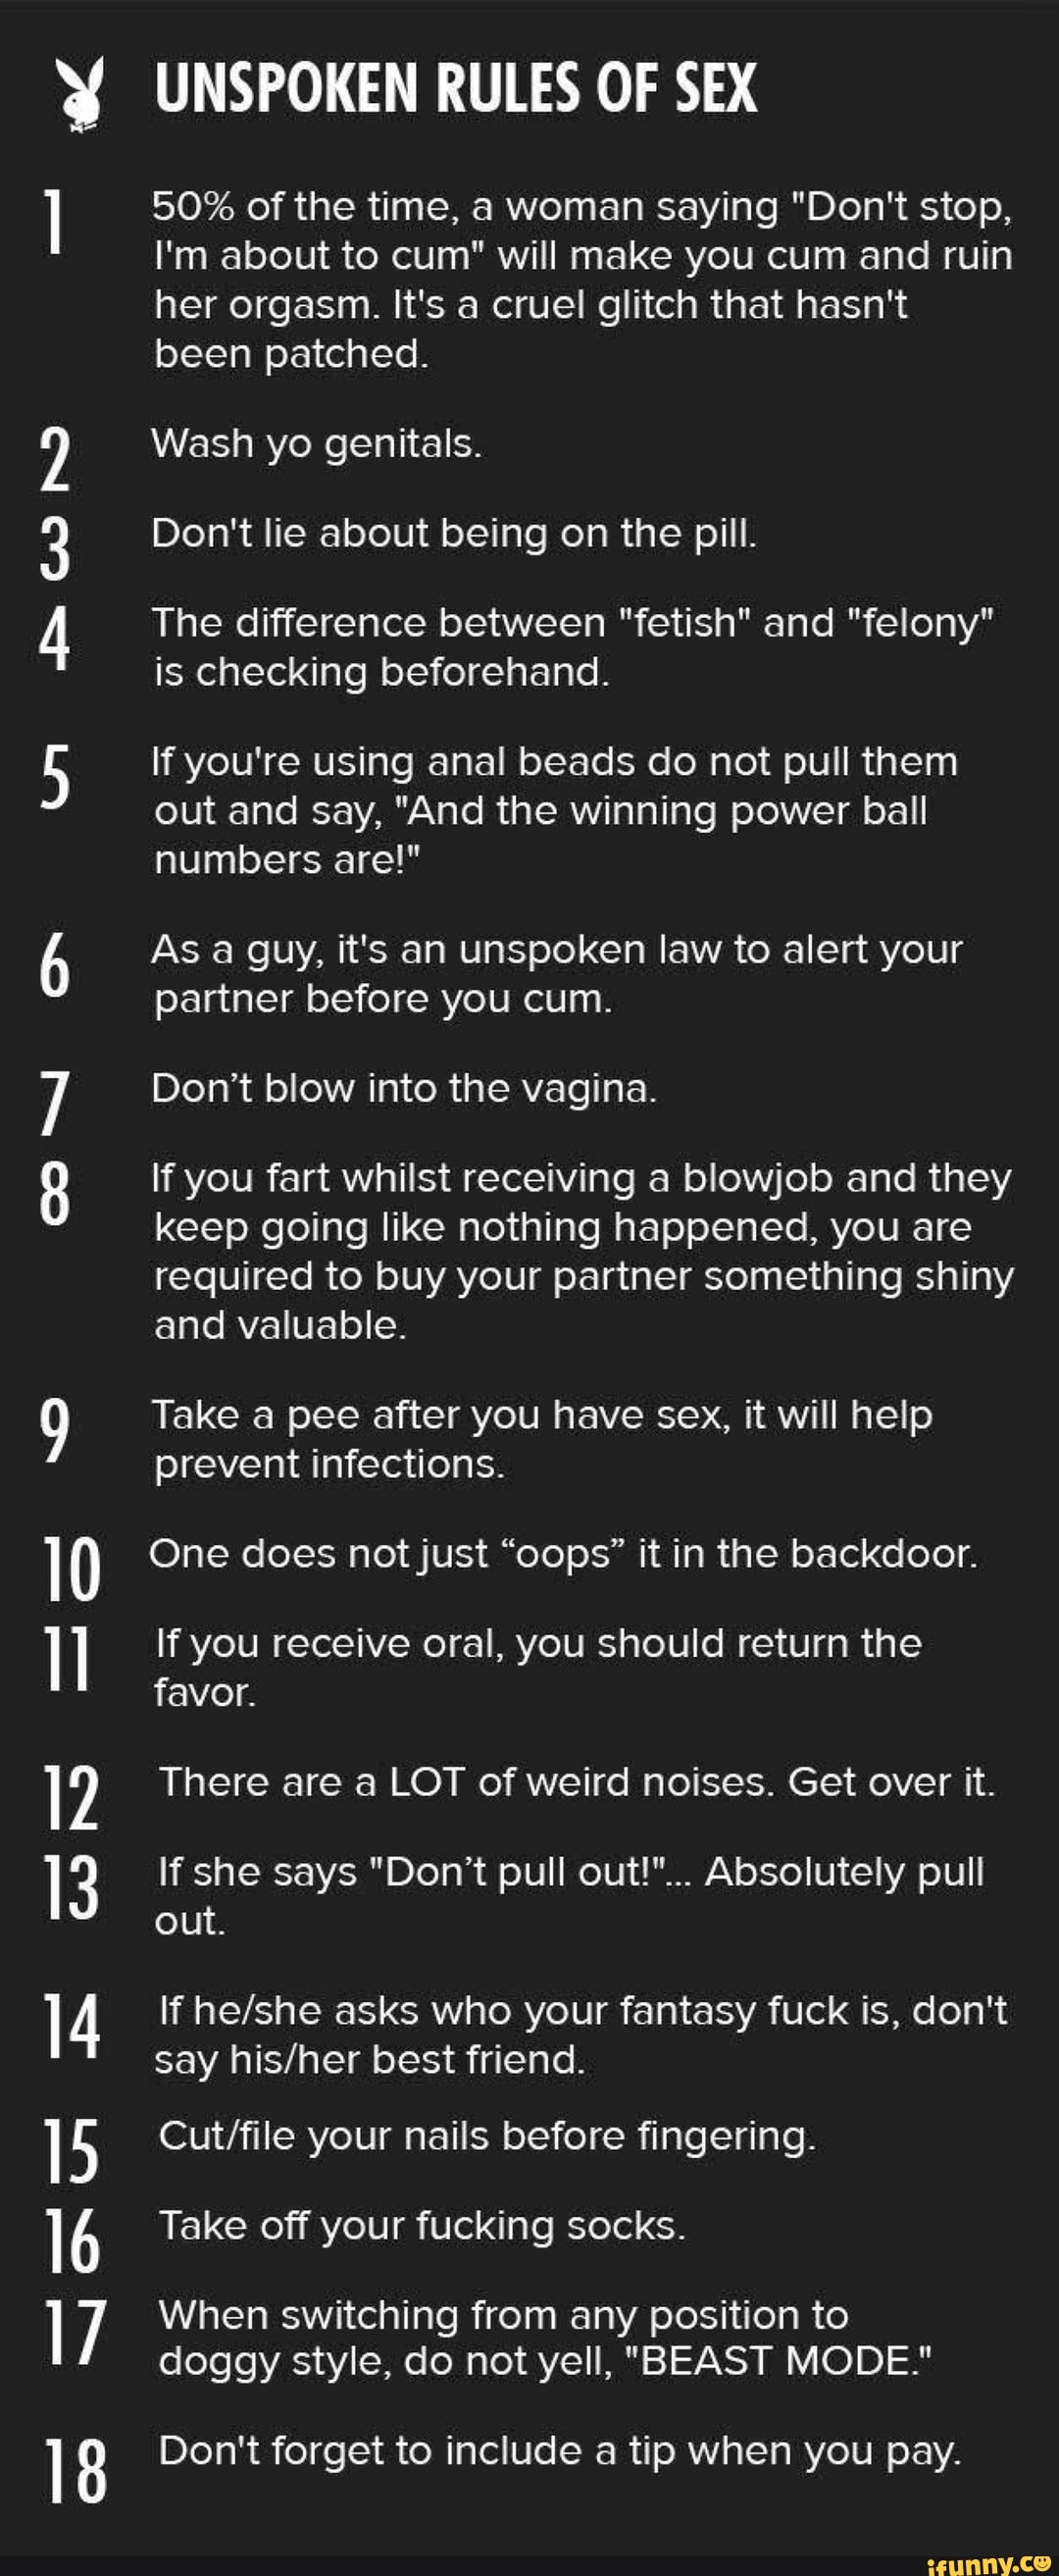 10 2 13 14 18 UNSPOKEN RULES OF SEX 50% of the time, a woman photo